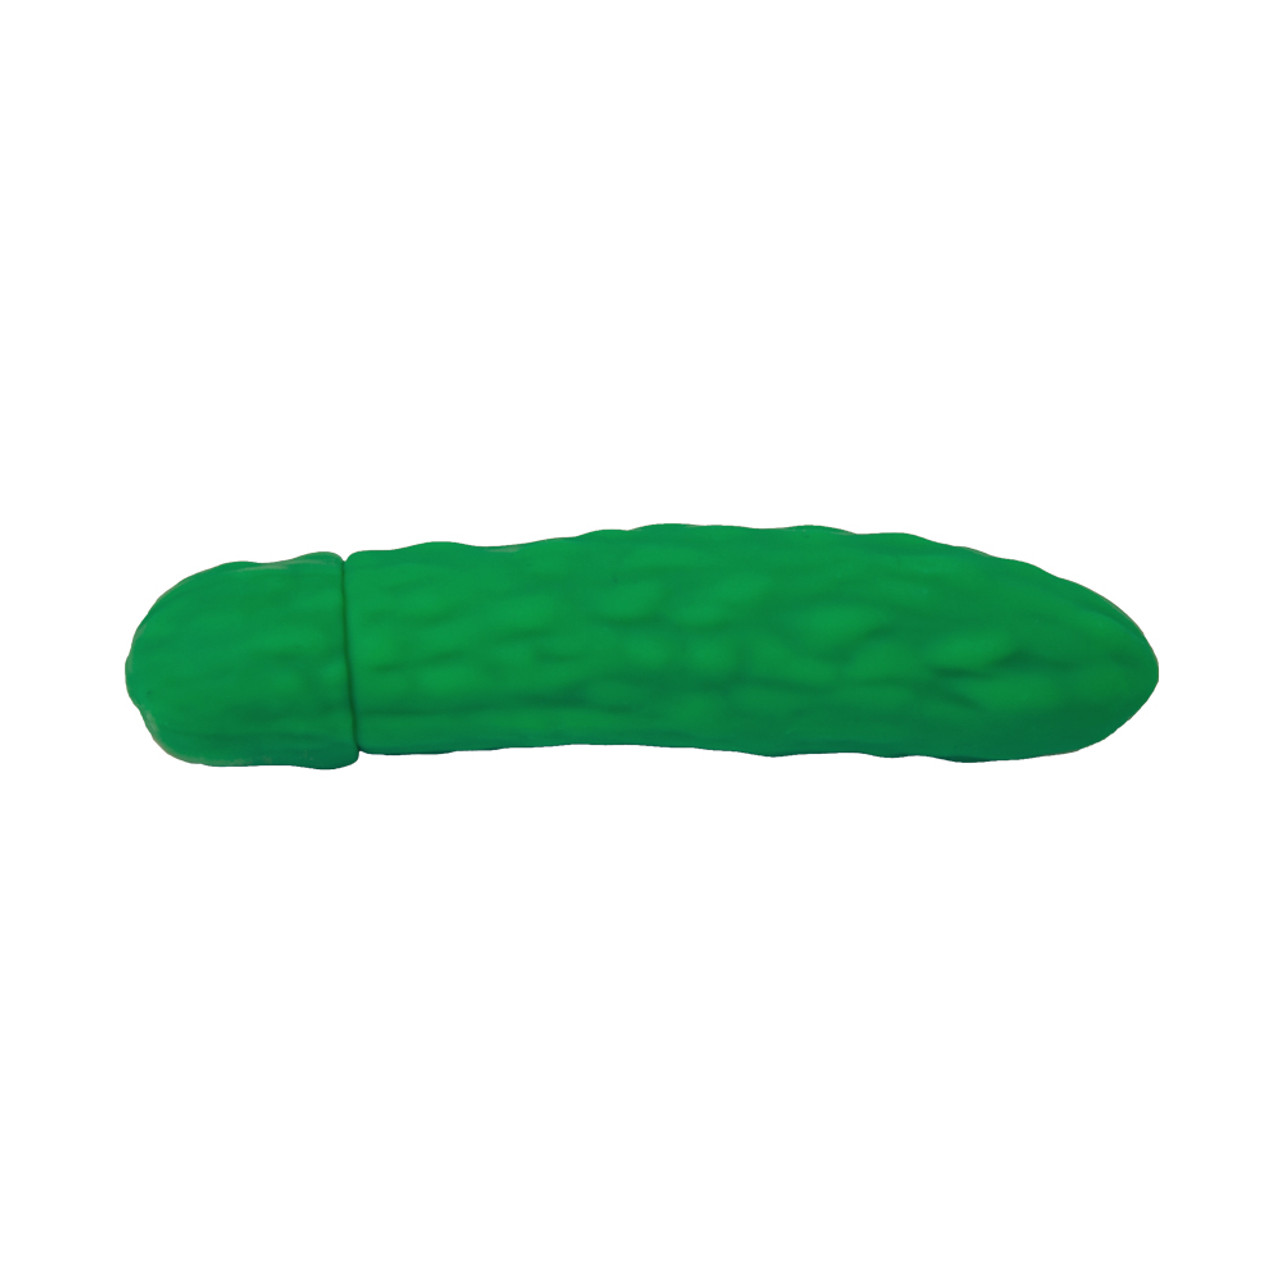 Buy The Dill Pickle 10 Function Silicone Vibrating Dildo